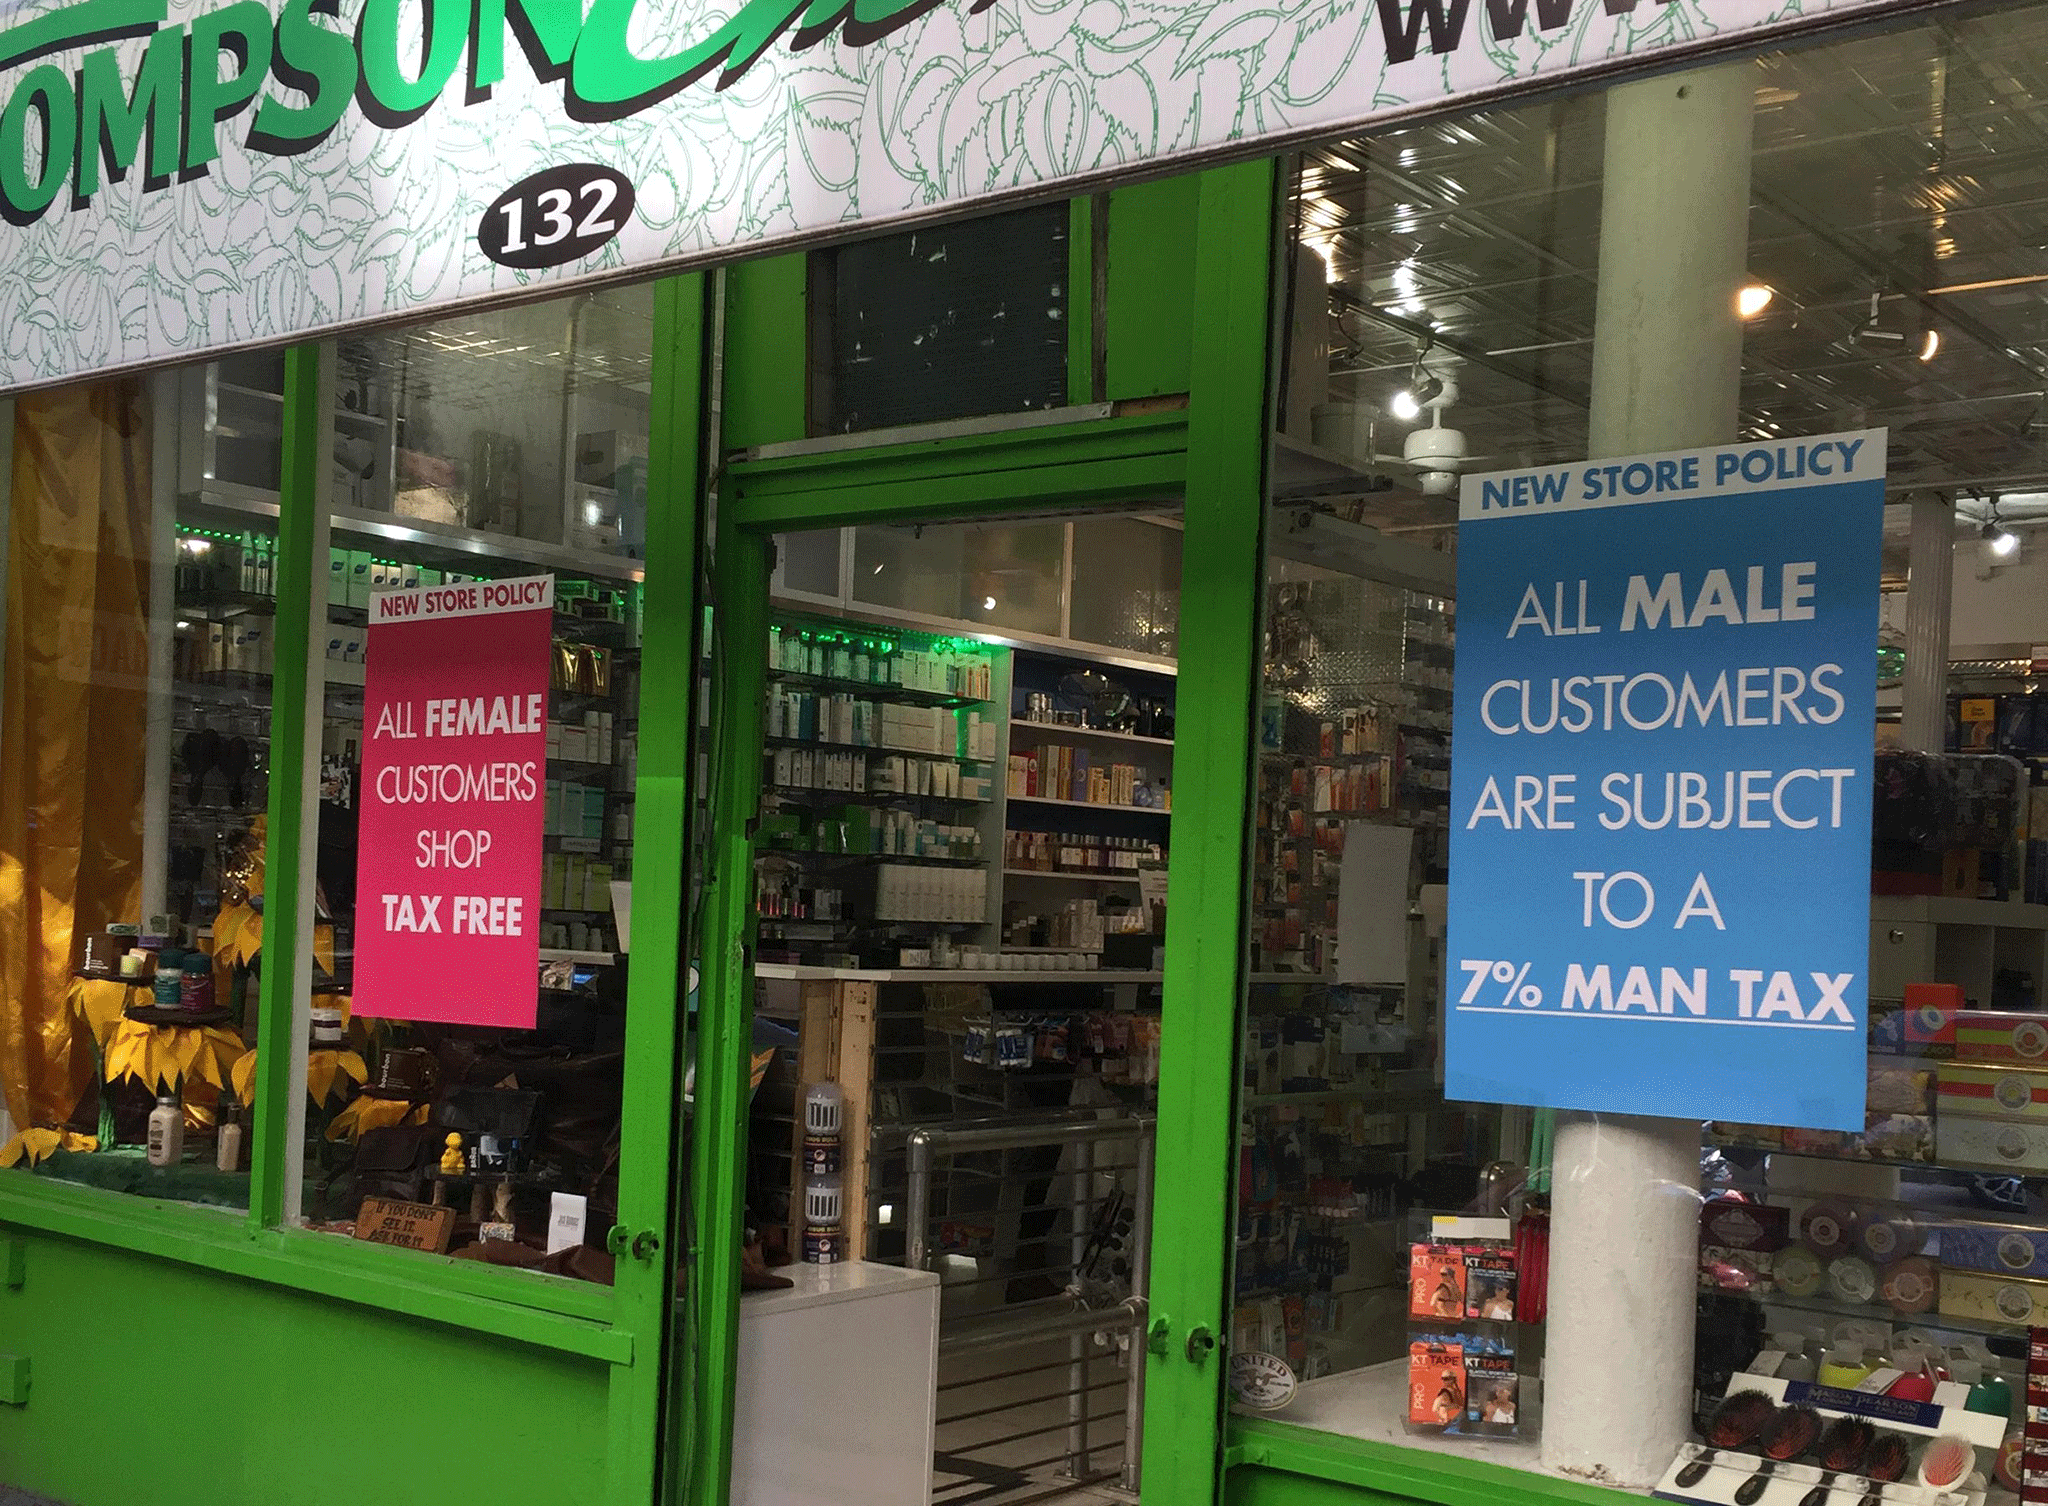 A sign outlining the 'man tax' policy at Thompson's chemists in Soho, Manhattan